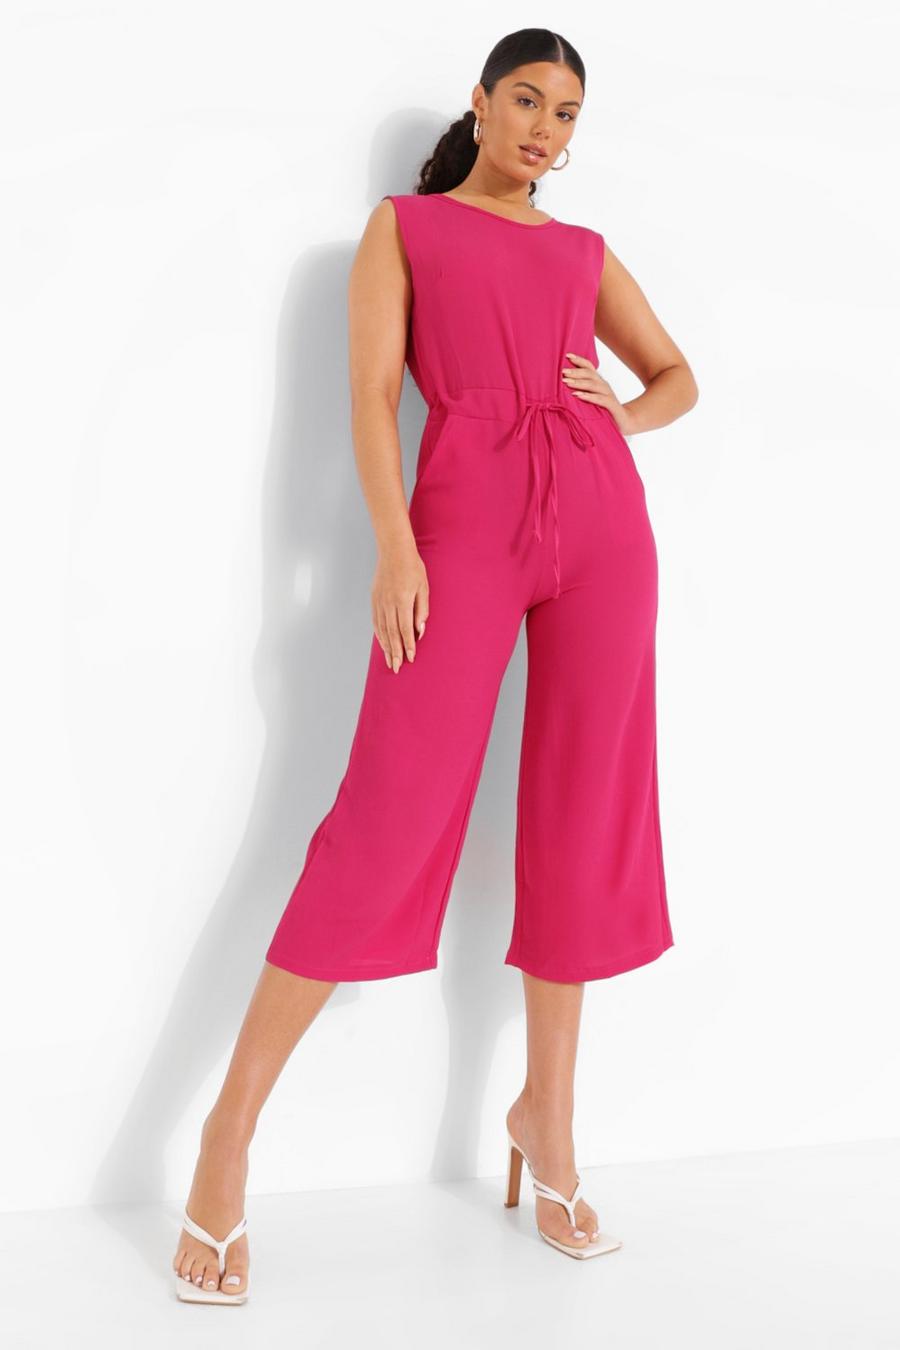 Hot pink rose Slouchy Drawstring Waist Culotte Jumpsuit